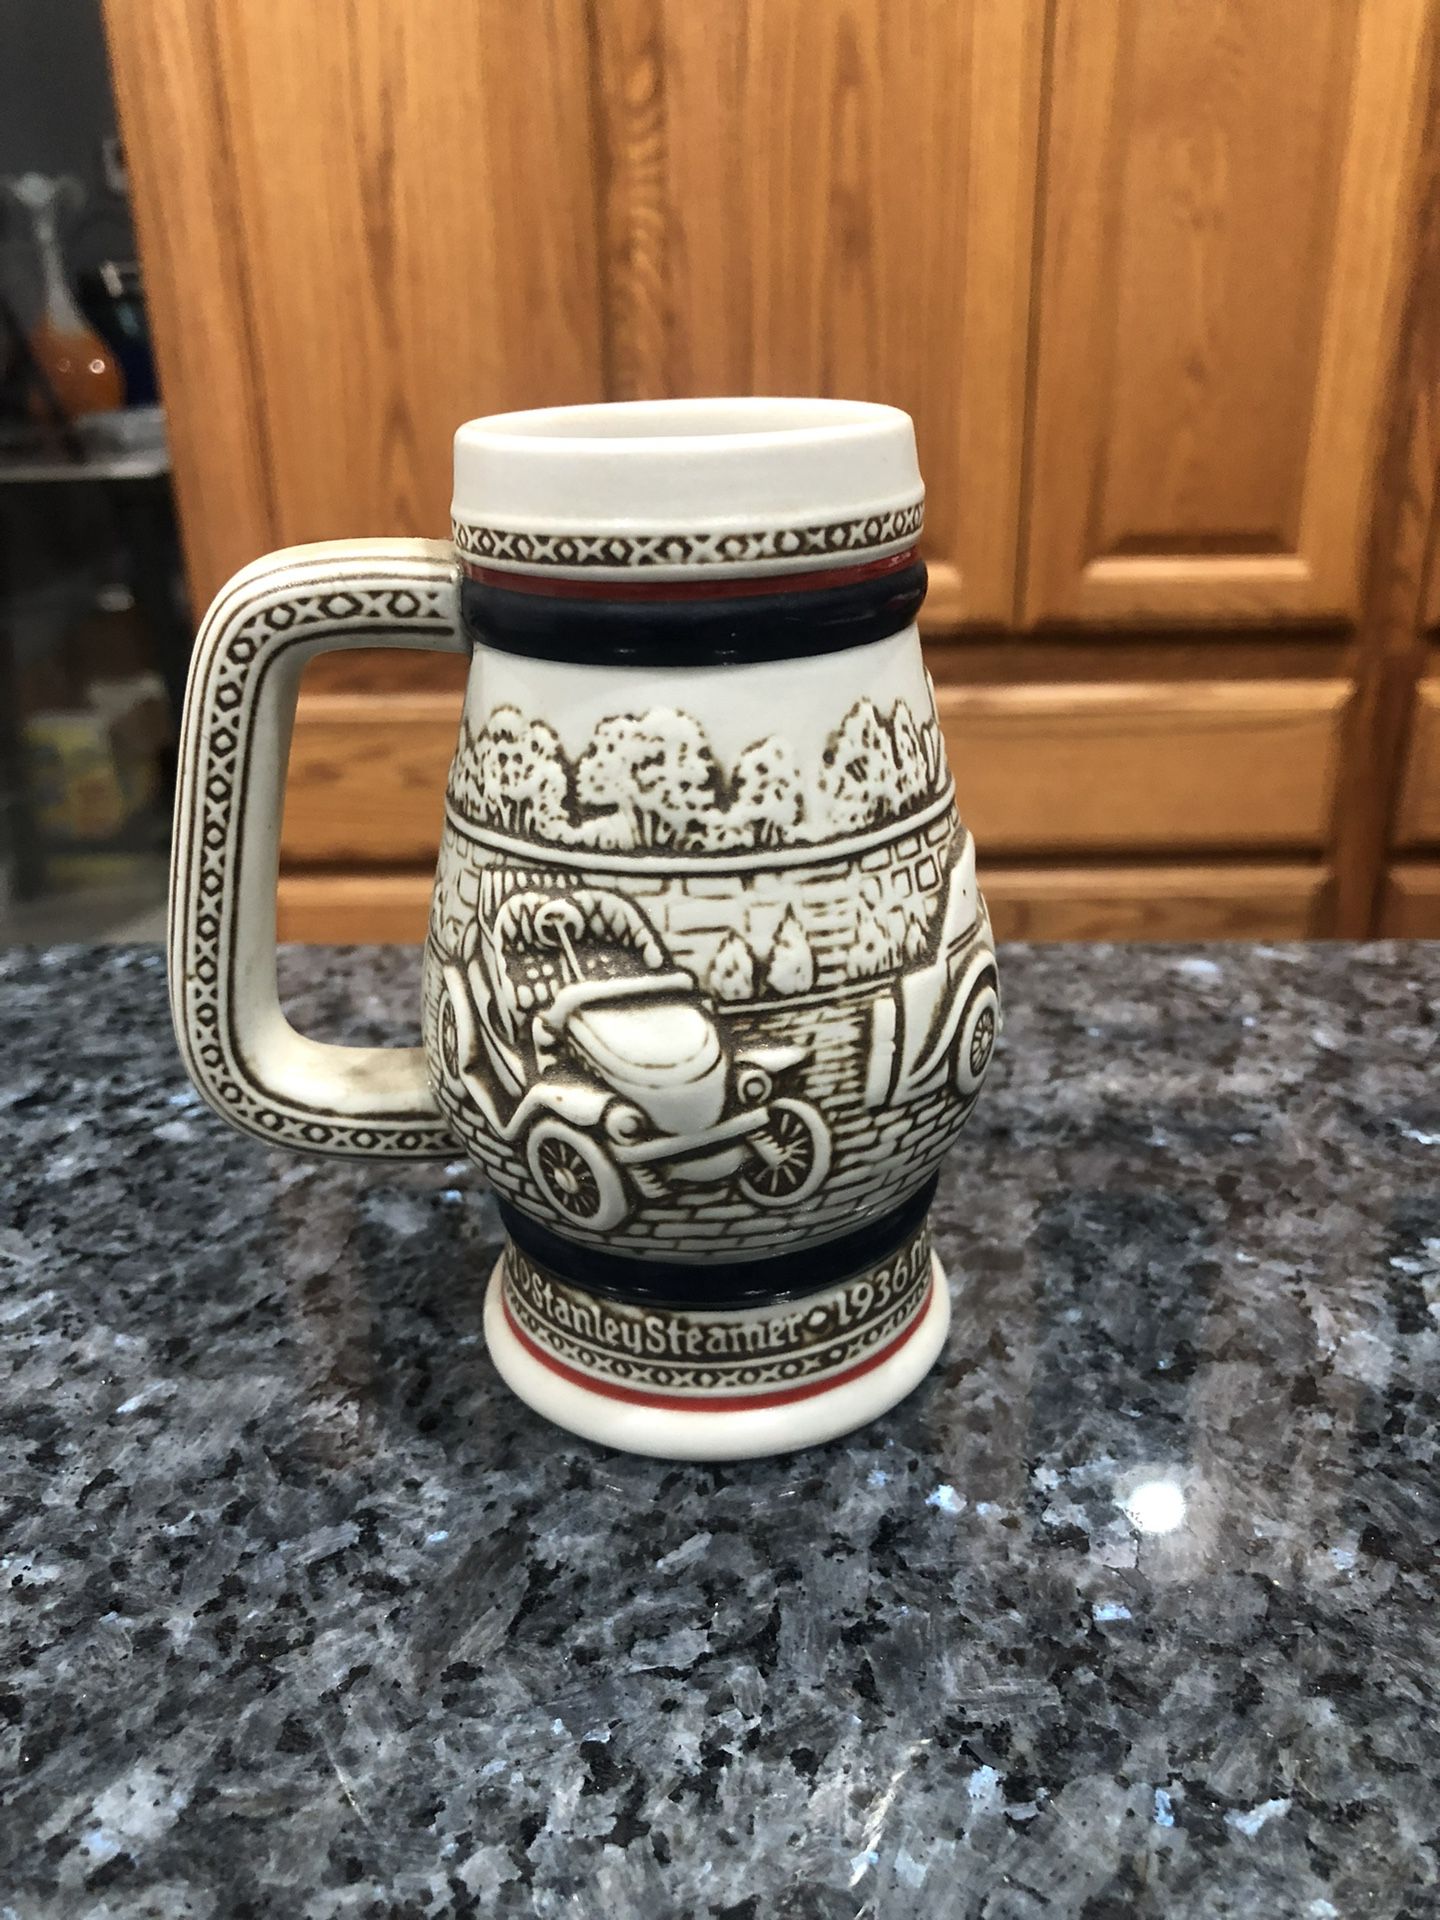 Vintage Avon 1982 Collectible Small Beer Stein Classic Car’s automotive Limited Edition.  Preowned Good Condition 